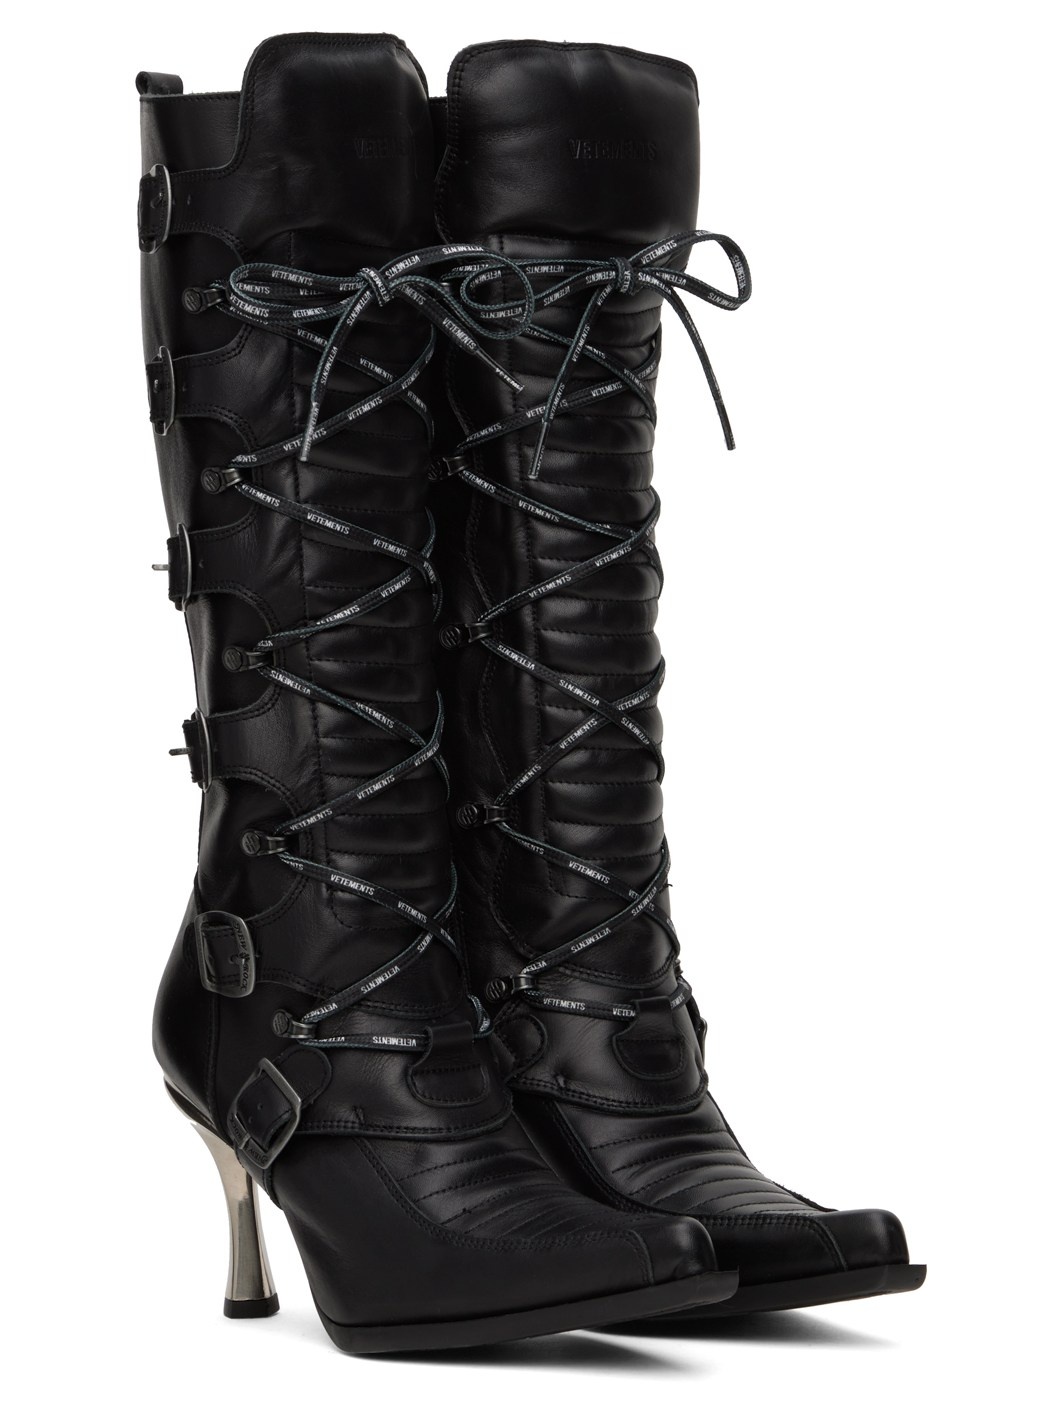 Black New Rock Edition Moto Lace-Up Boots - 4